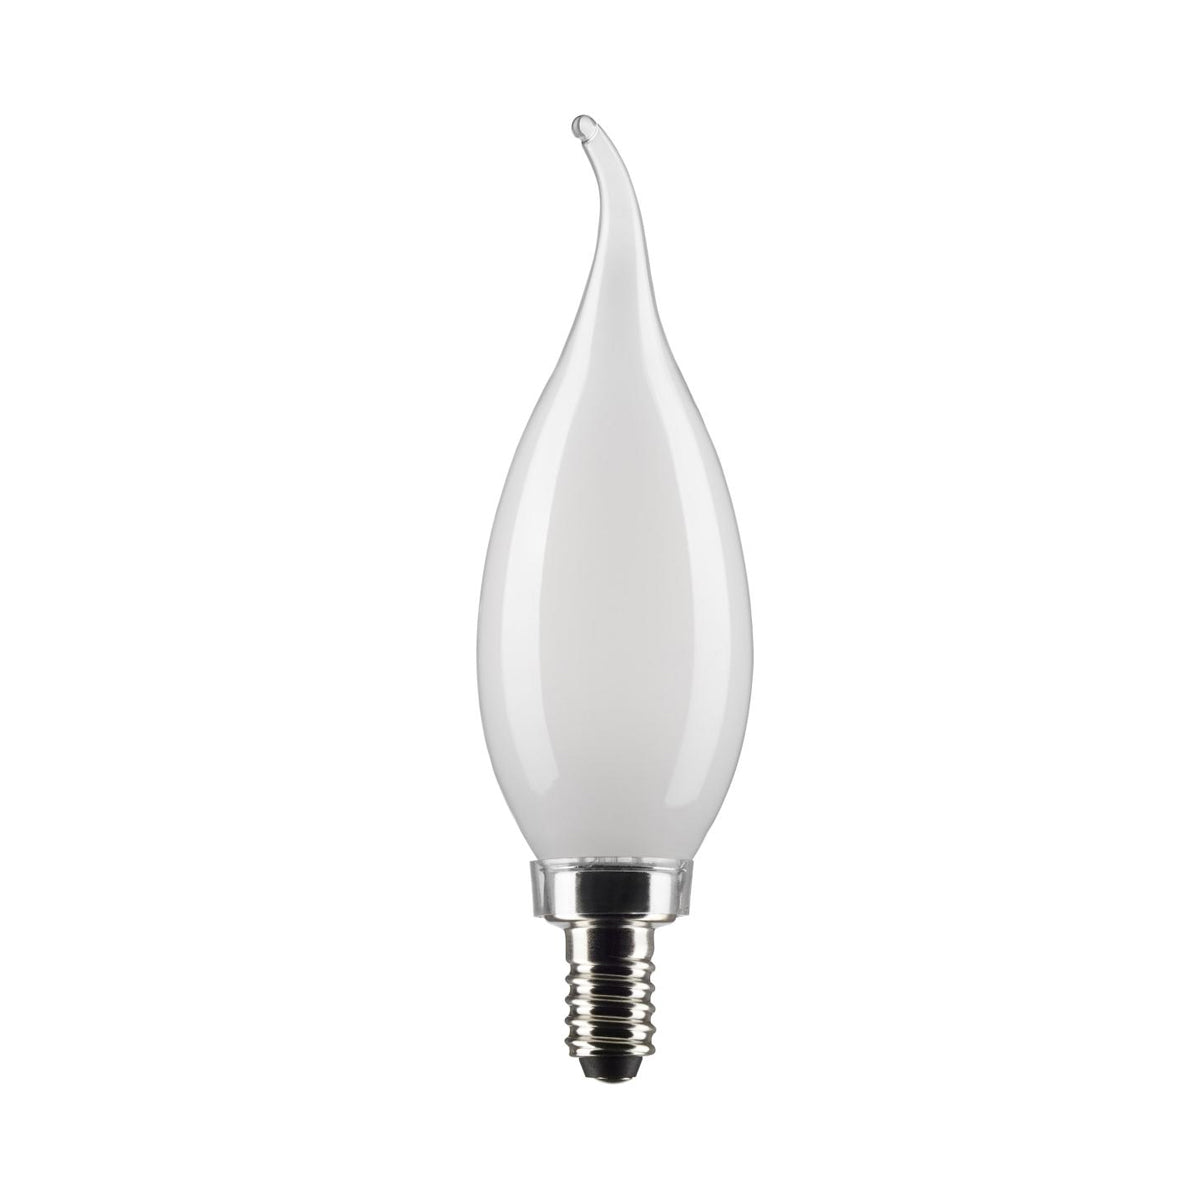 CA10 Candle LED Bulb, 40W Equivalent,4 Watt, 350 Lumens, 2700K, E12 Candelabra Base, Frosted Finish, Pack Of 2